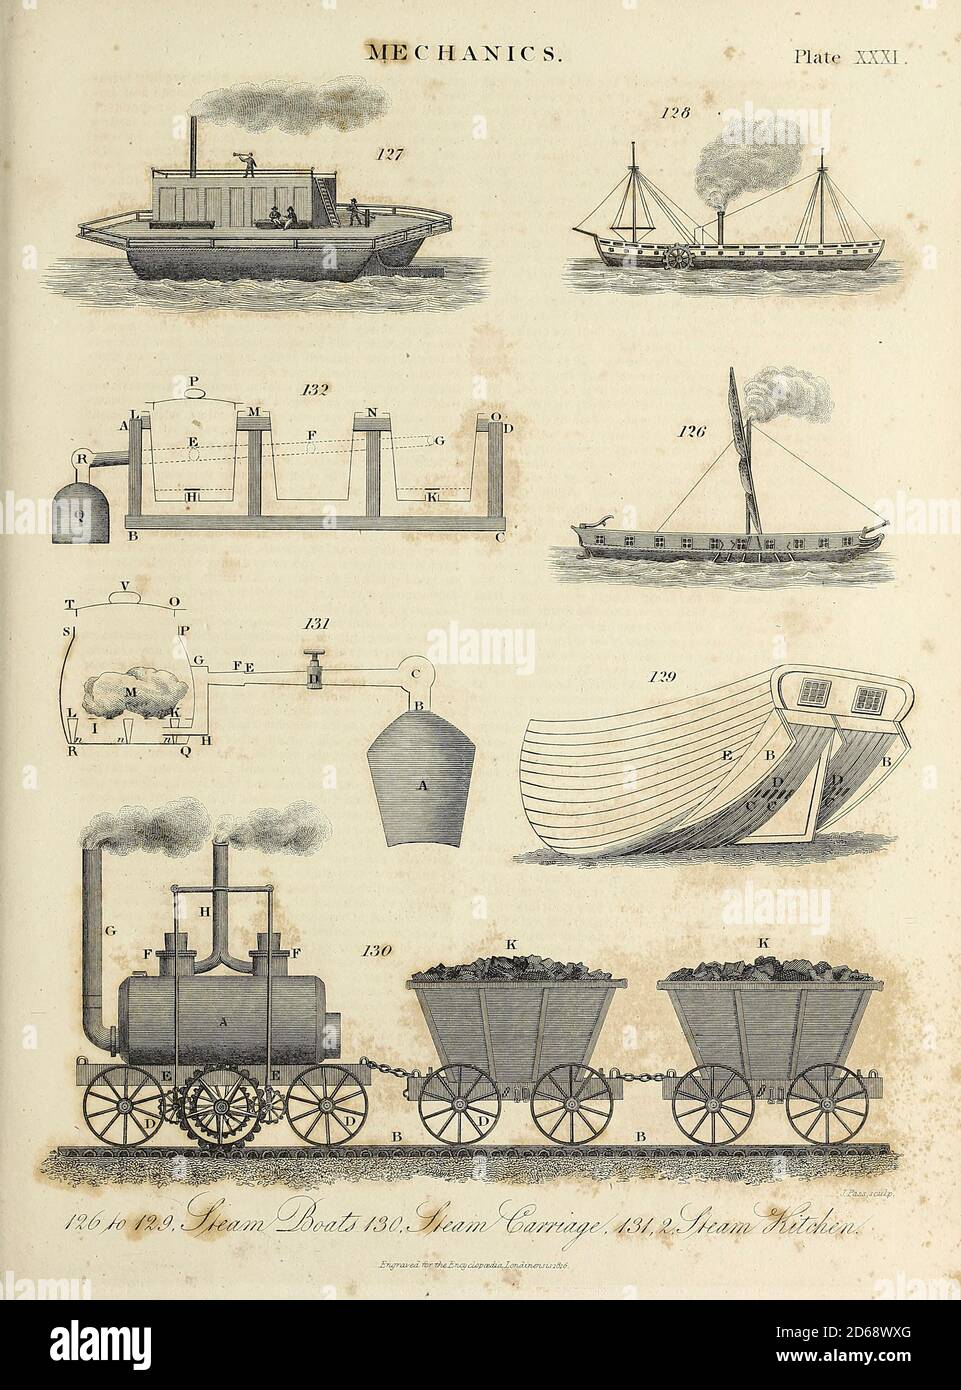 19th Century illustration of Steam Engines. Mechanics is the area of physics concerned with the motions of macroscopic objects. Forces applied to objects result in displacements, or changes of an object's position relative to its environment. This branch of physics has its origins in Ancient Greece with the writings of Aristotle and Archimedes. During the early modern period, scientists such as Galileo, Kepler, and Newton laid the foundation for what is now known as classical mechanics. It is a branch of classical physics that deals with particles that are either at rest or are moving with vel Stock Photo